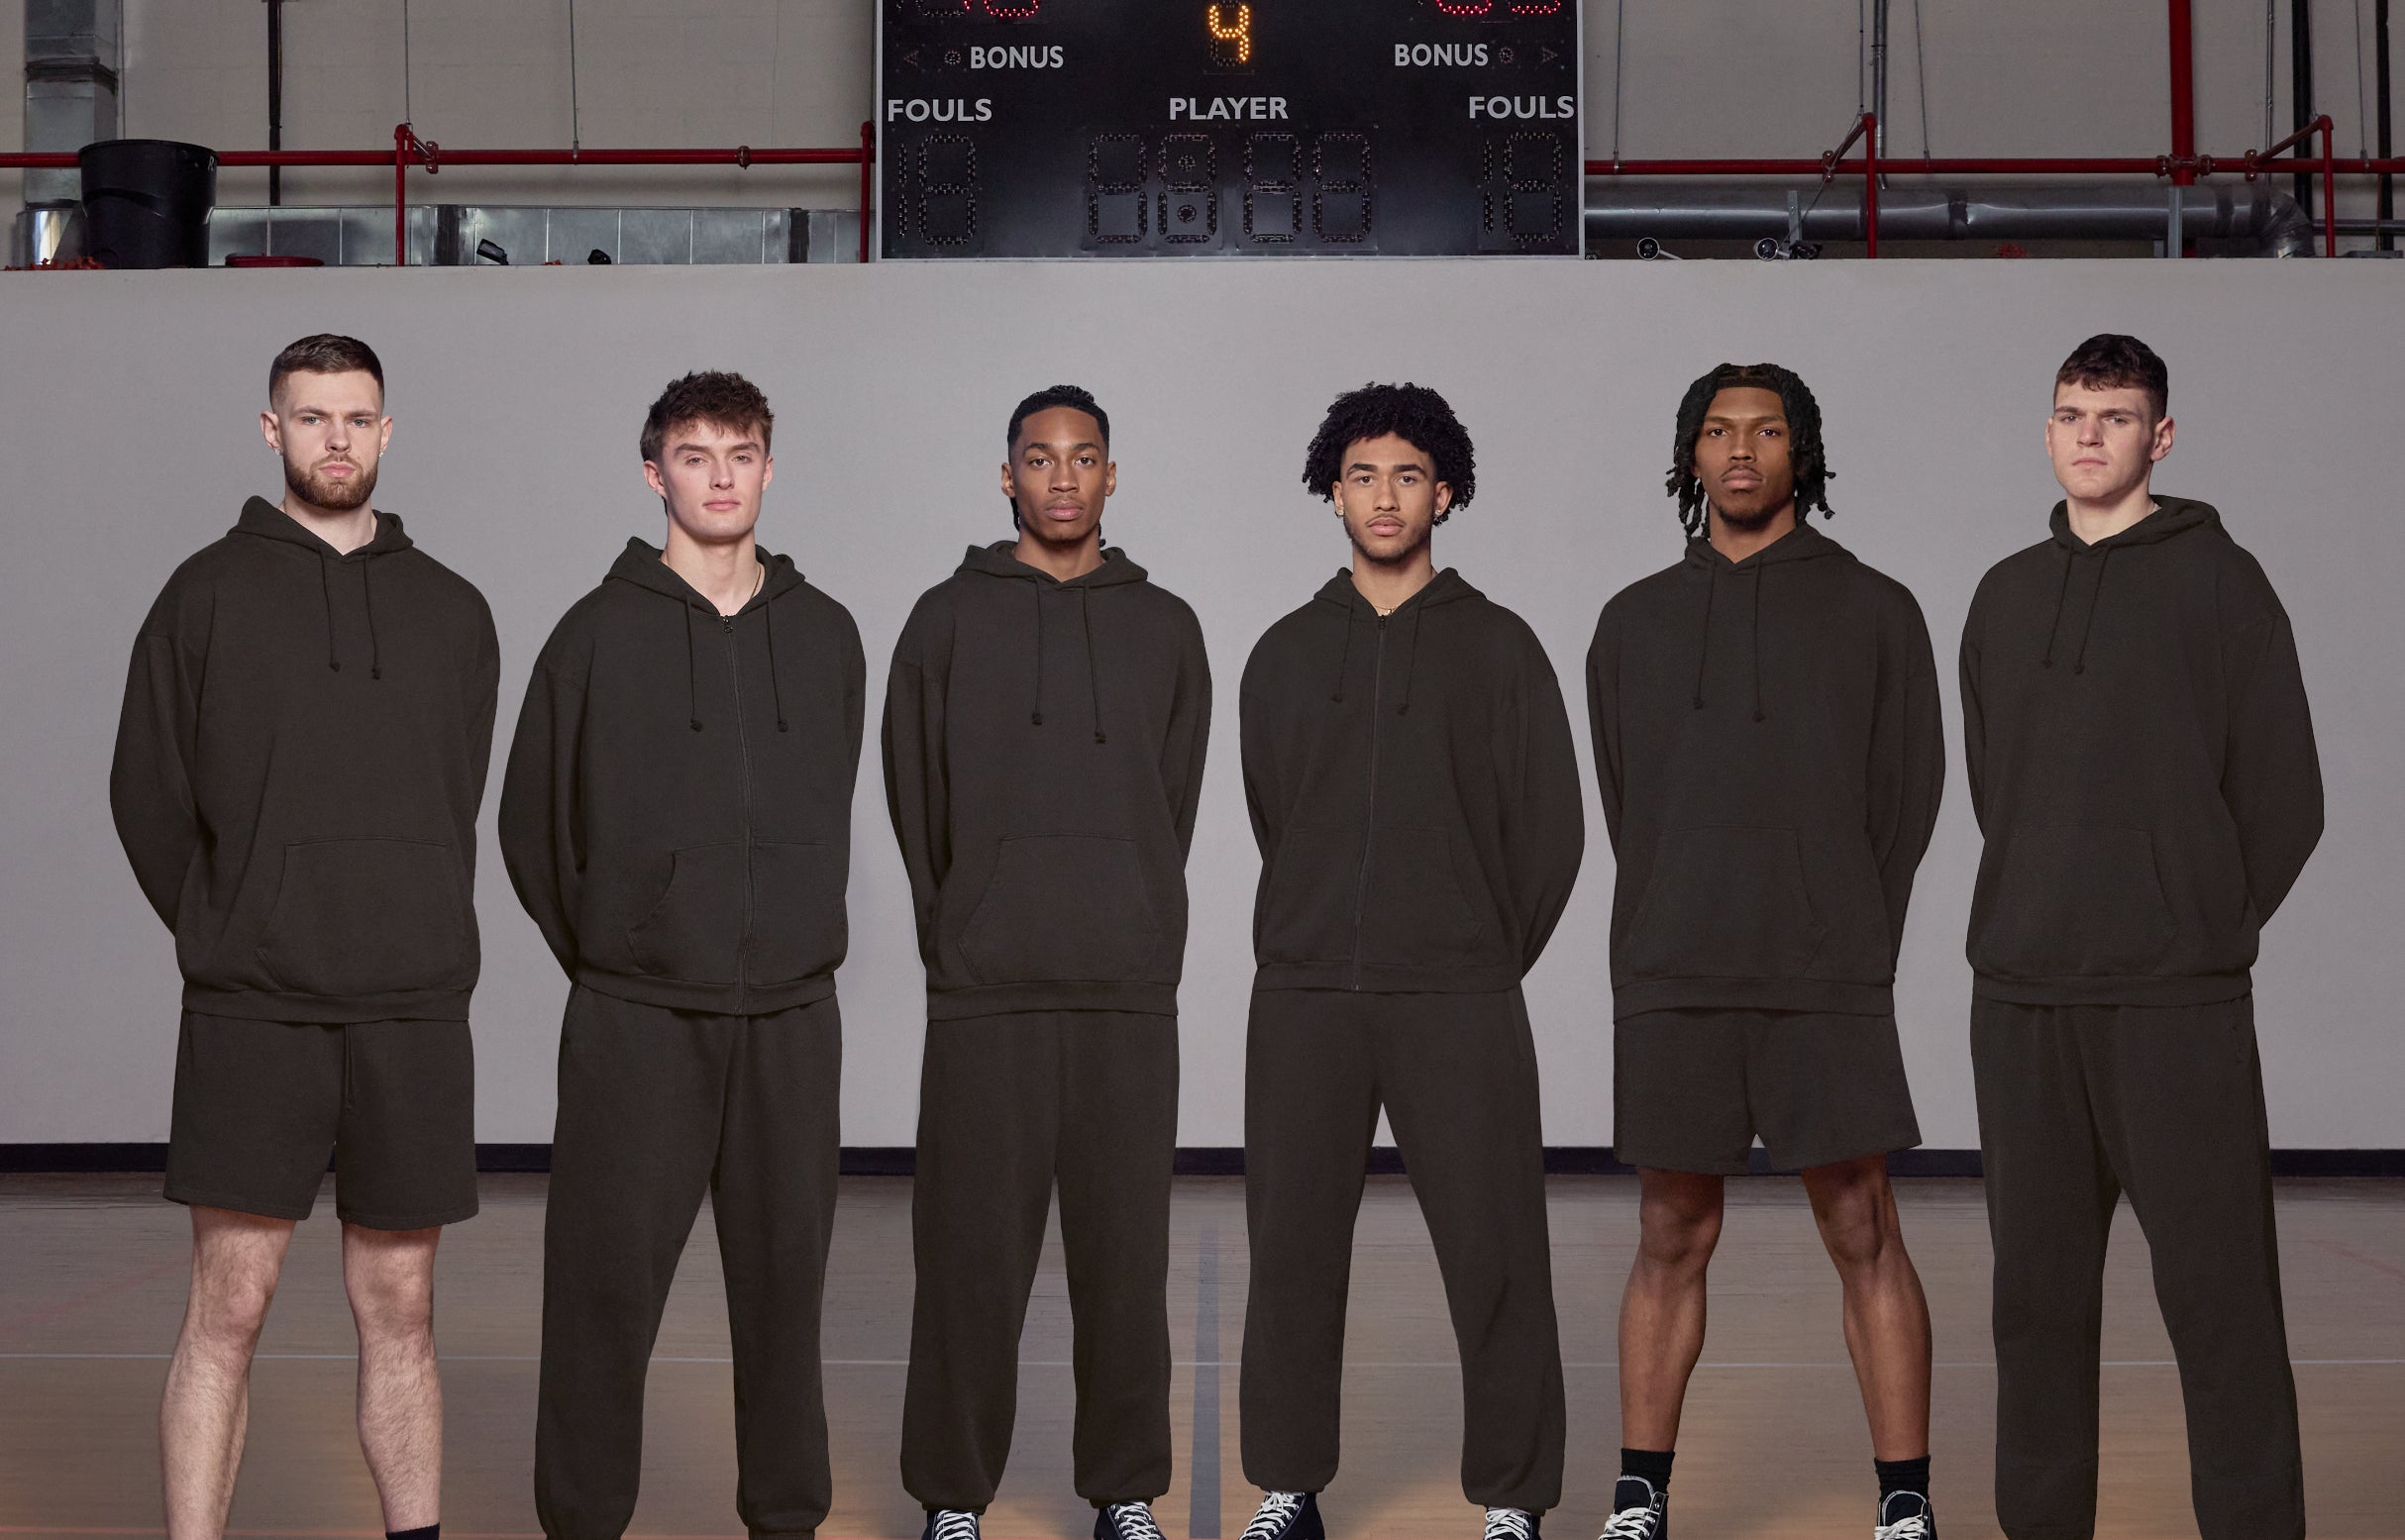 Kim Kardashian extends her reach into sports by partnering with six top  college basketball stars ahead of March Madness: Hoopers set to front SKIMS  loungewear campaign